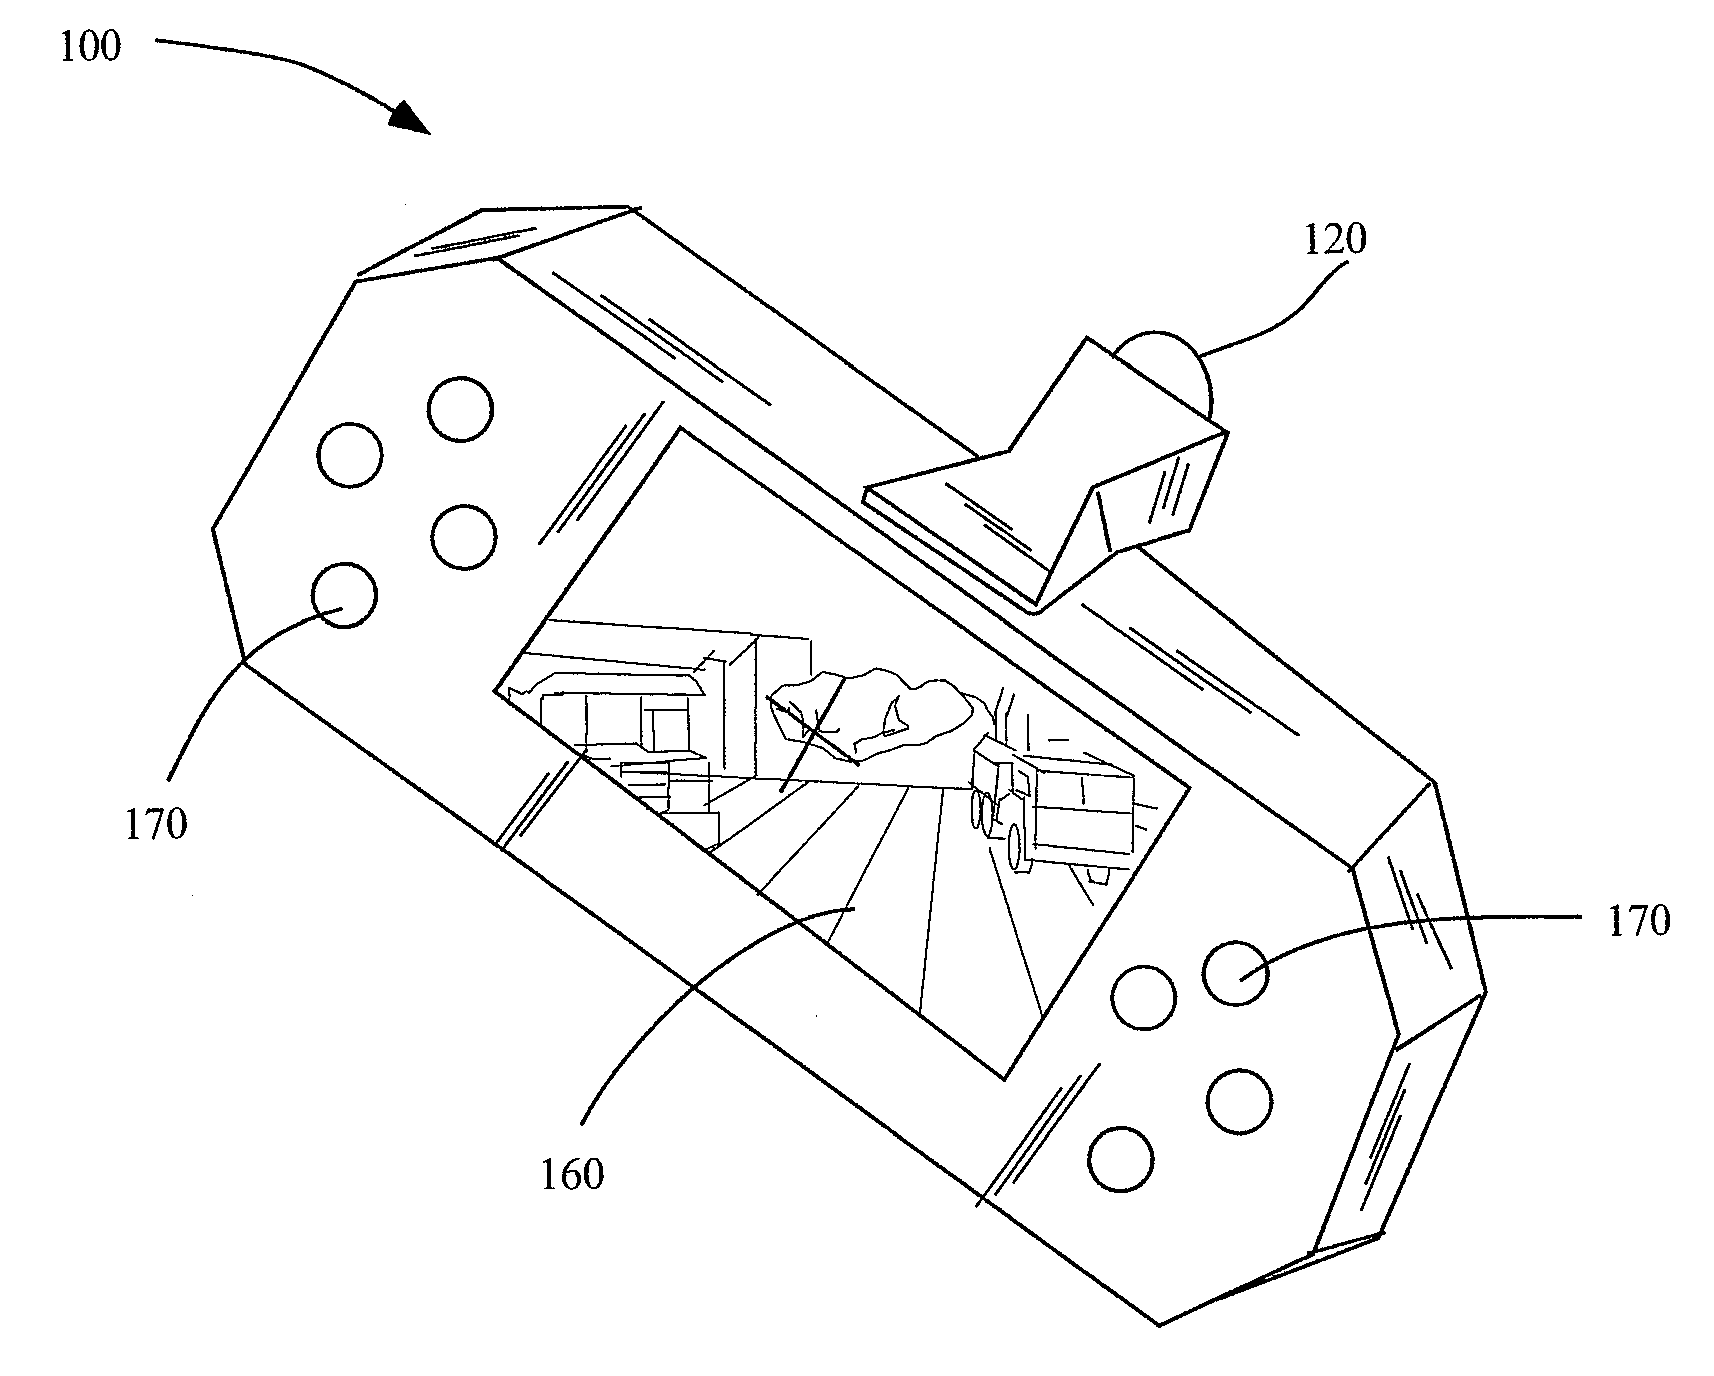 Method and apparatus for an on-screen/off-screen first person gaming experience